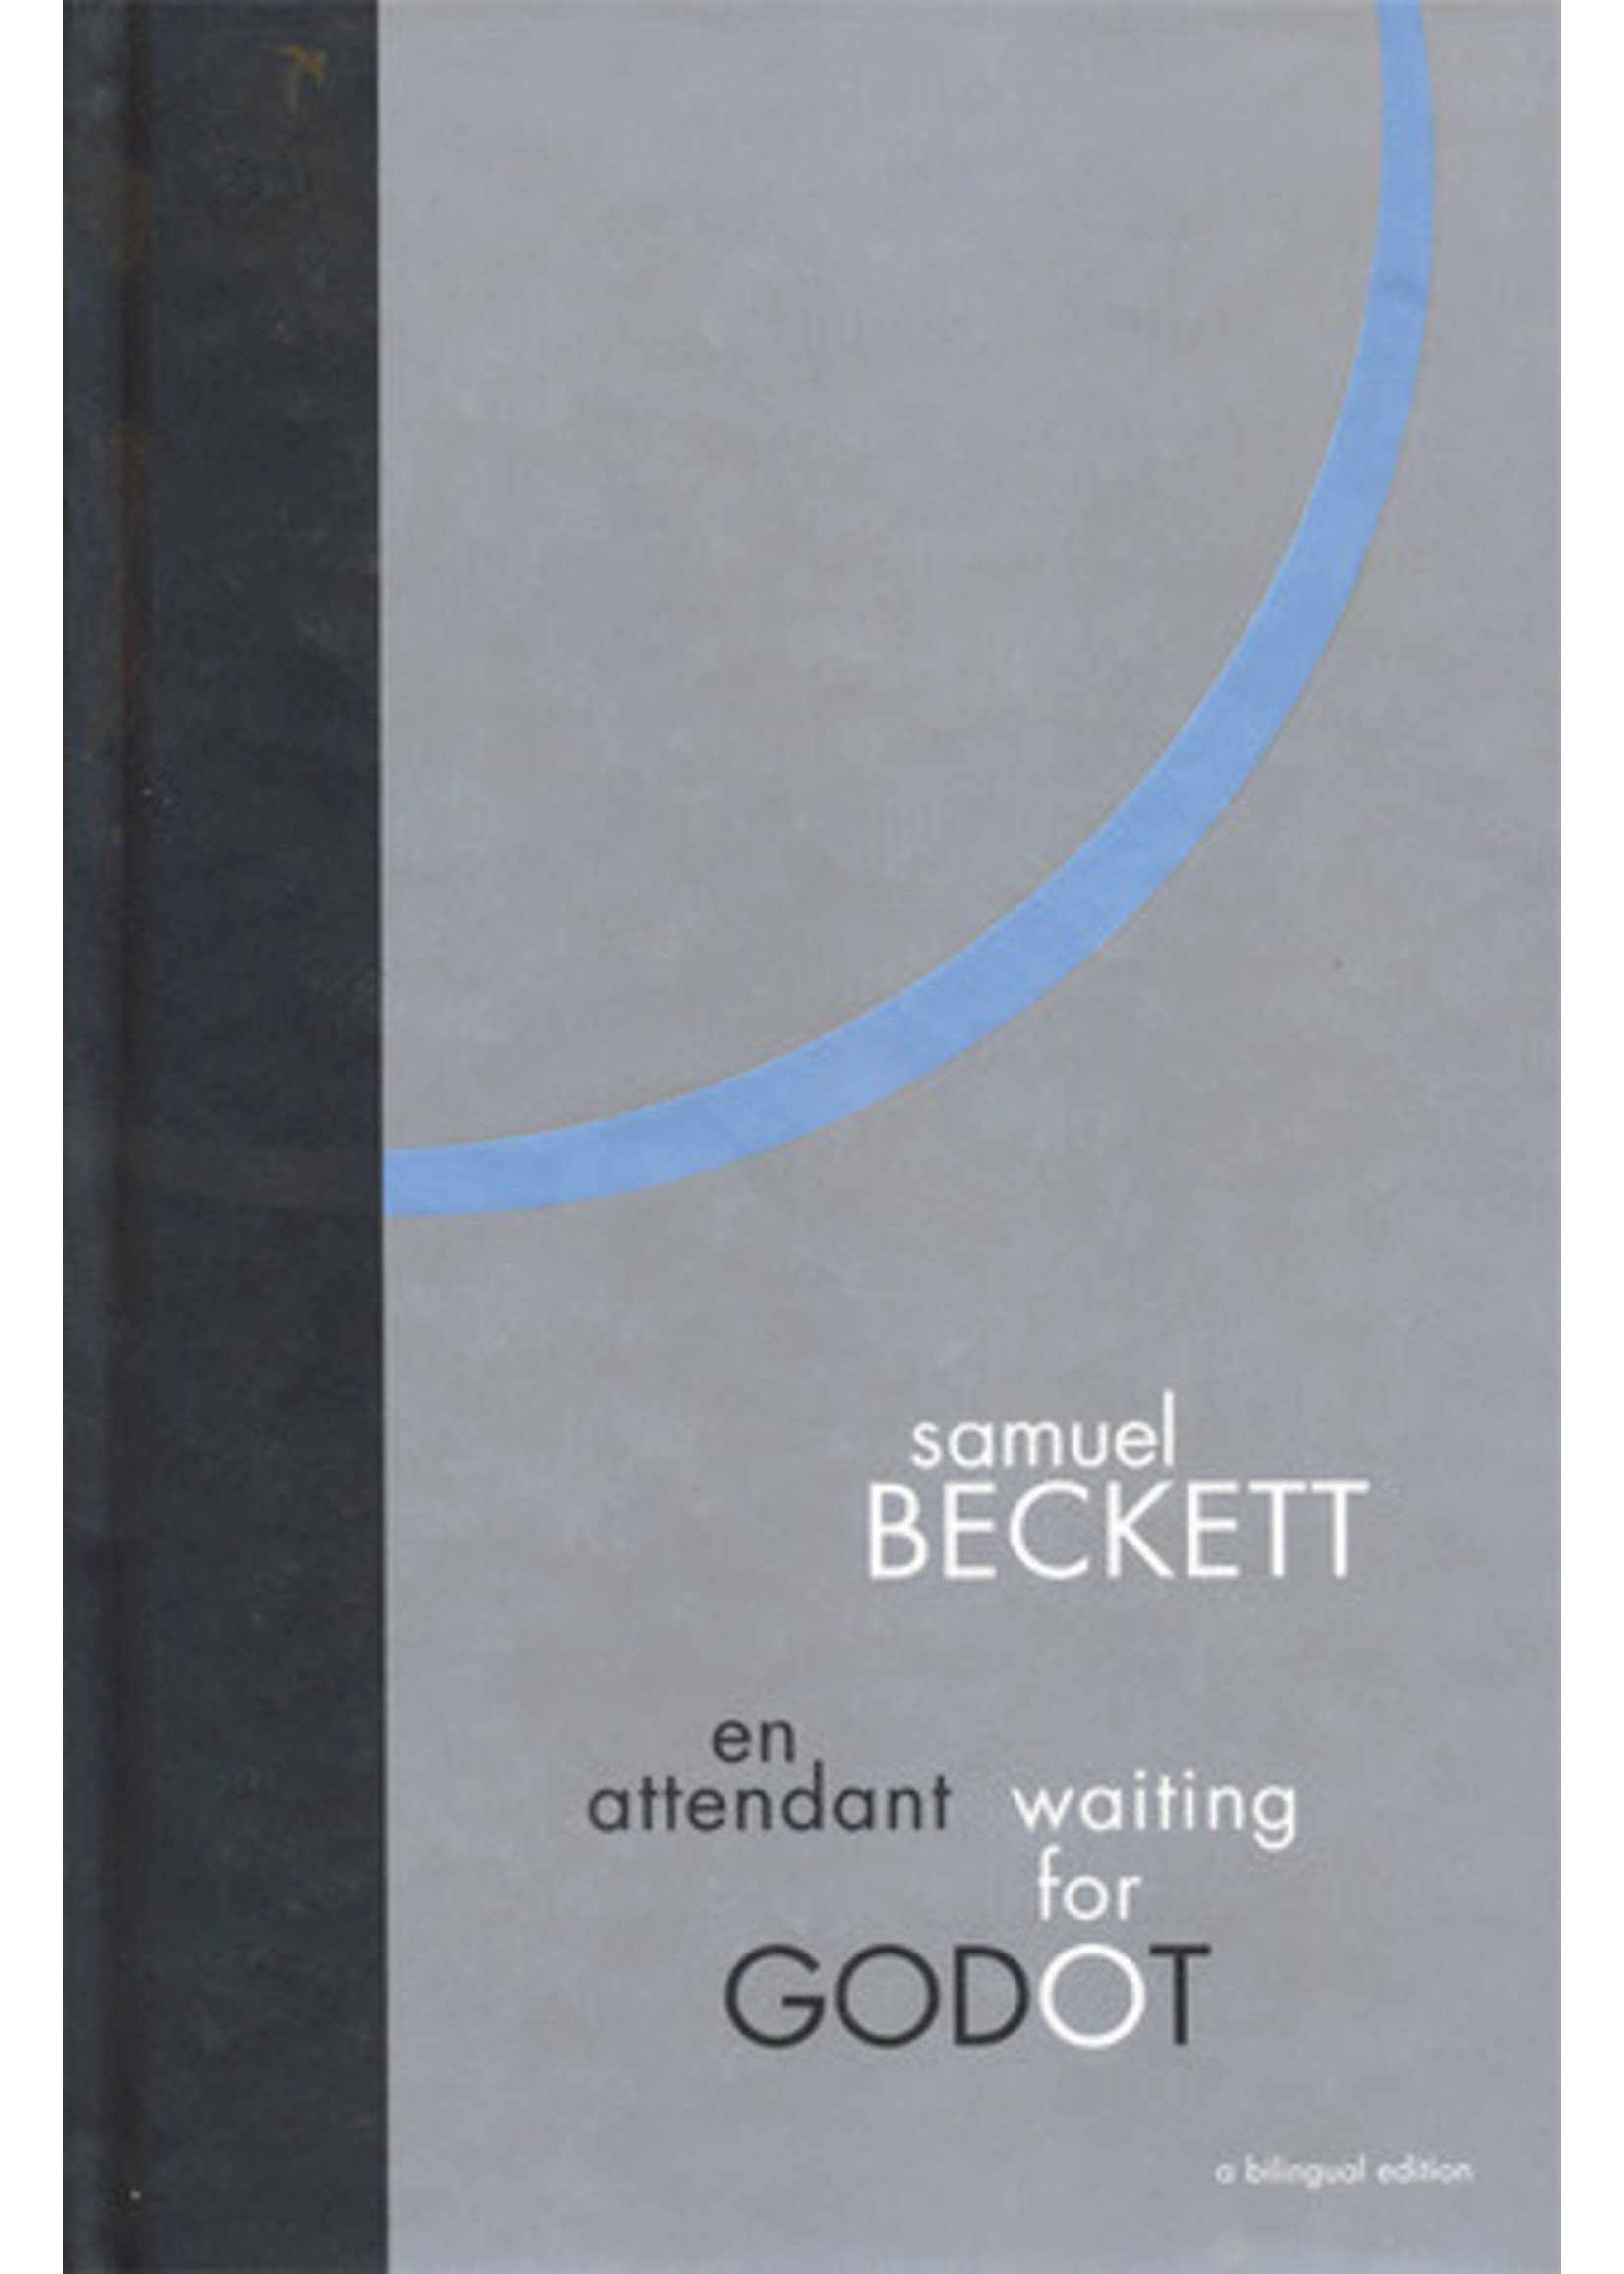 Waiting For Godot: A Tragicomedy in Two Acts: A Bilingual Edition by Samuel Beckett